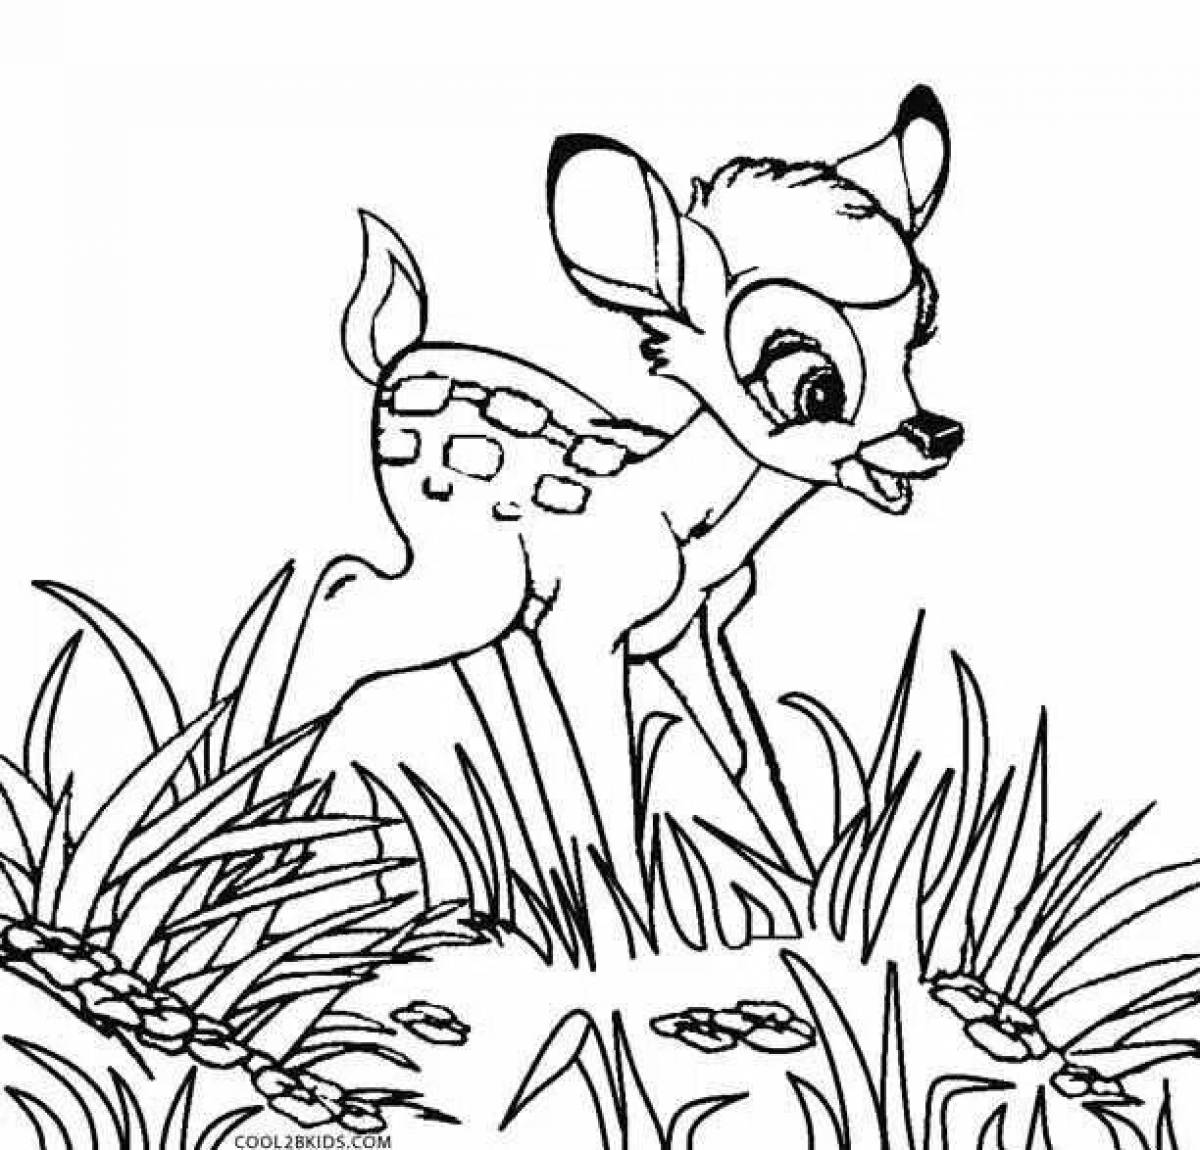 Animated bambi fawn coloring page